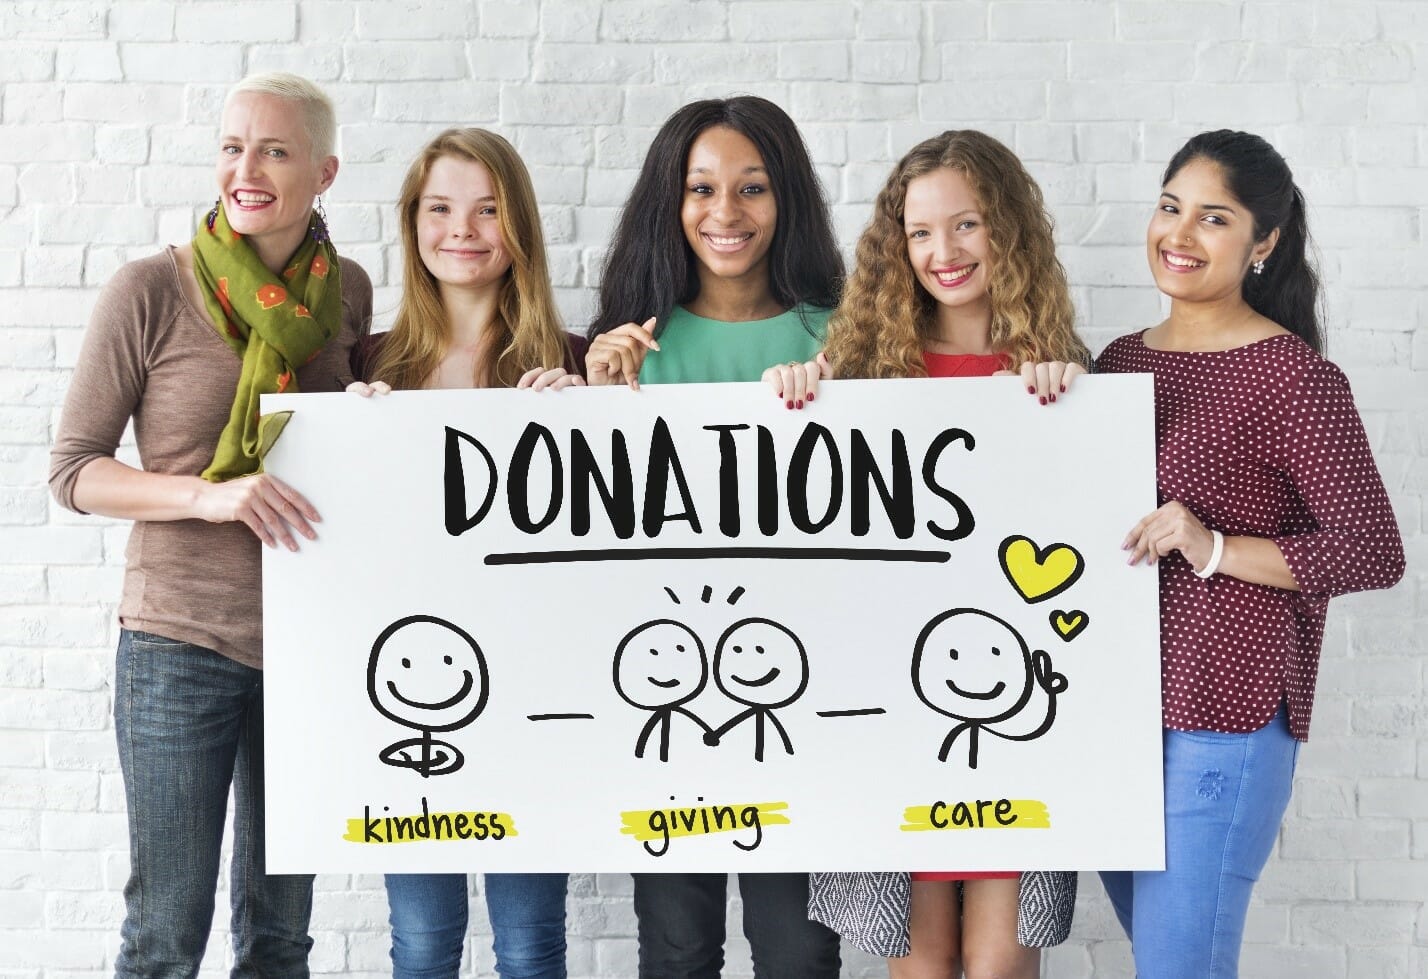 How to claim charitable donations on my tax return